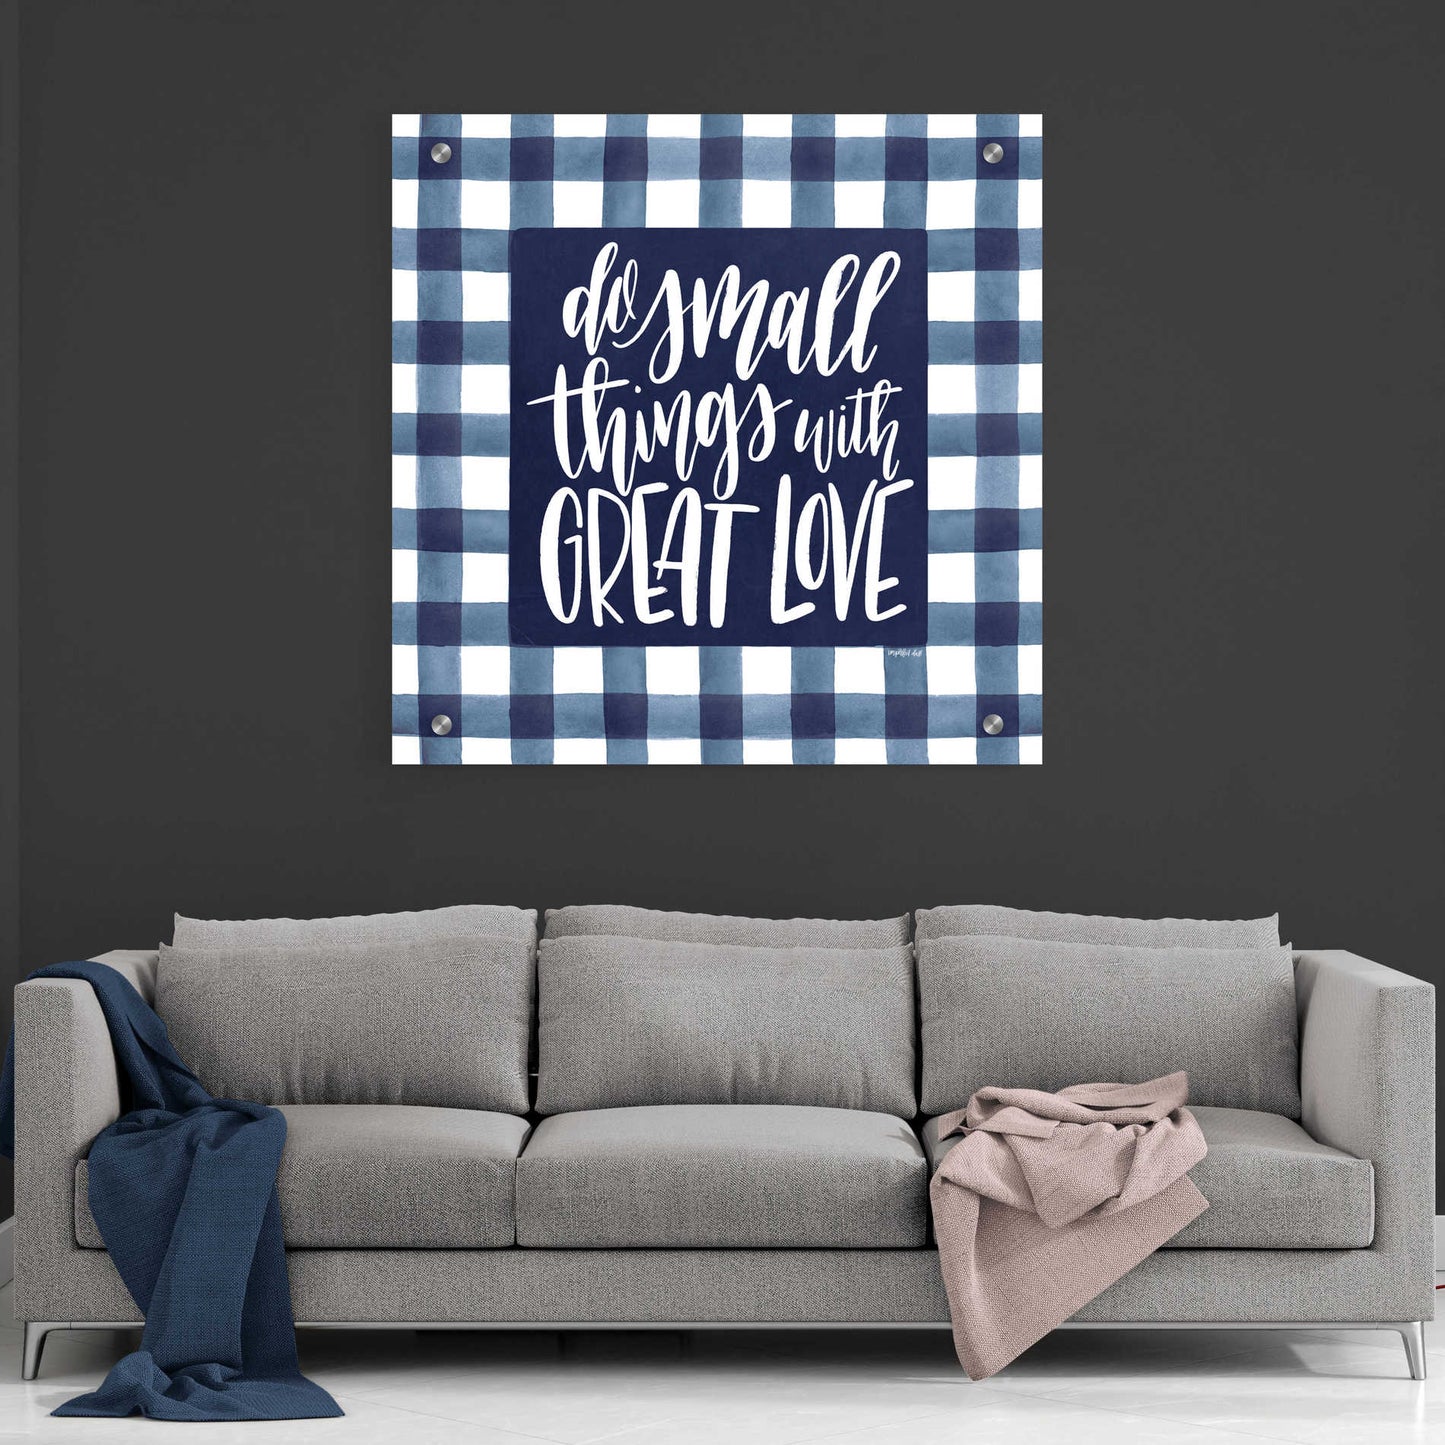 Epic Art 'Do Small Things with Great Love' by Imperfect Dust, Acrylic Glass Wall Art,36x36